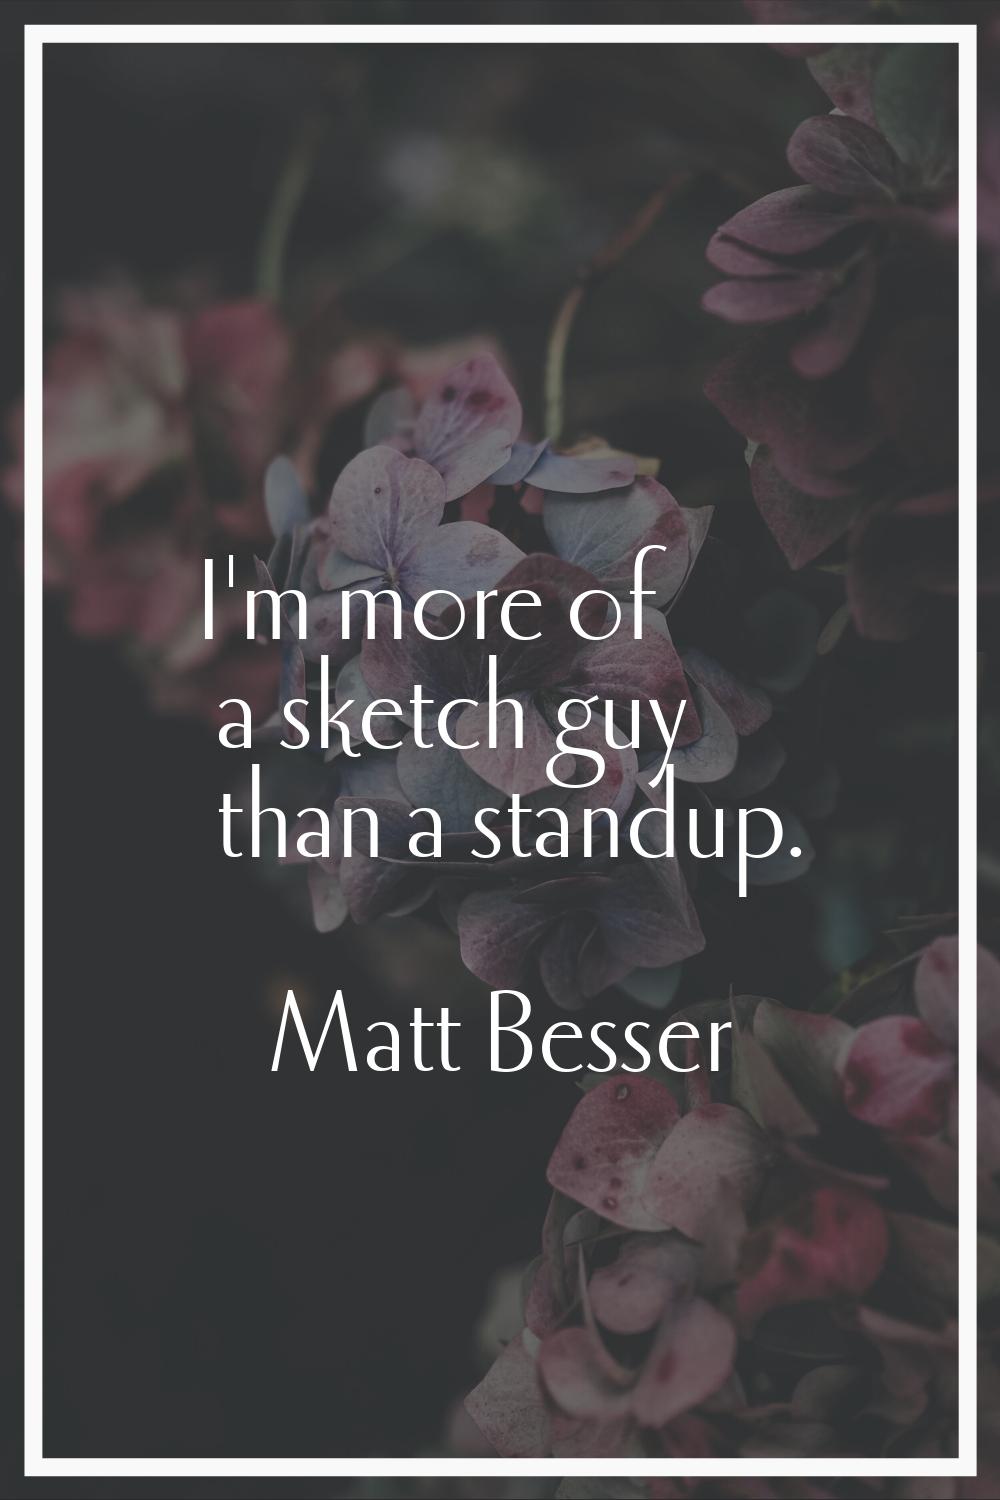 I'm more of a sketch guy than a standup.